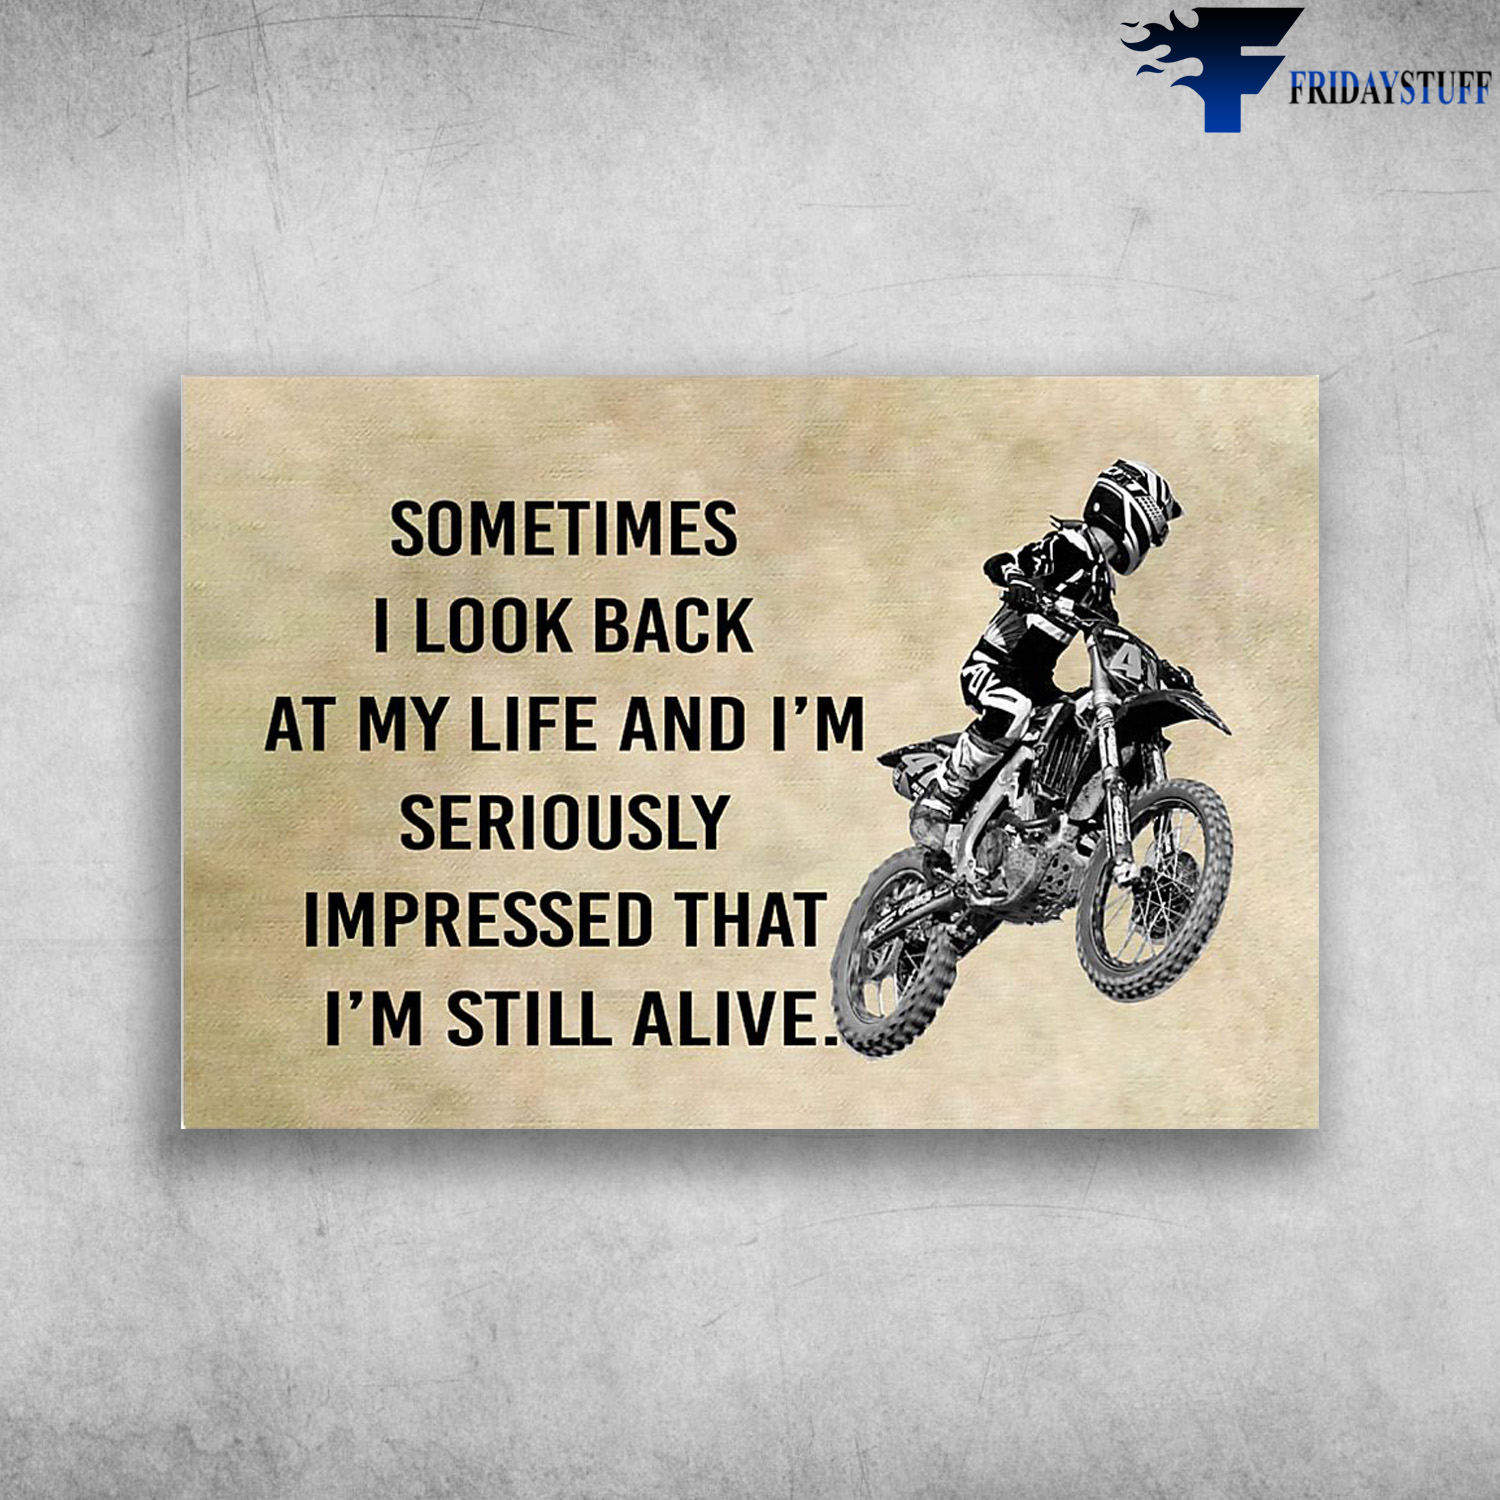 The Man Riding Motorbike - Sometimes I Look Back At My Life